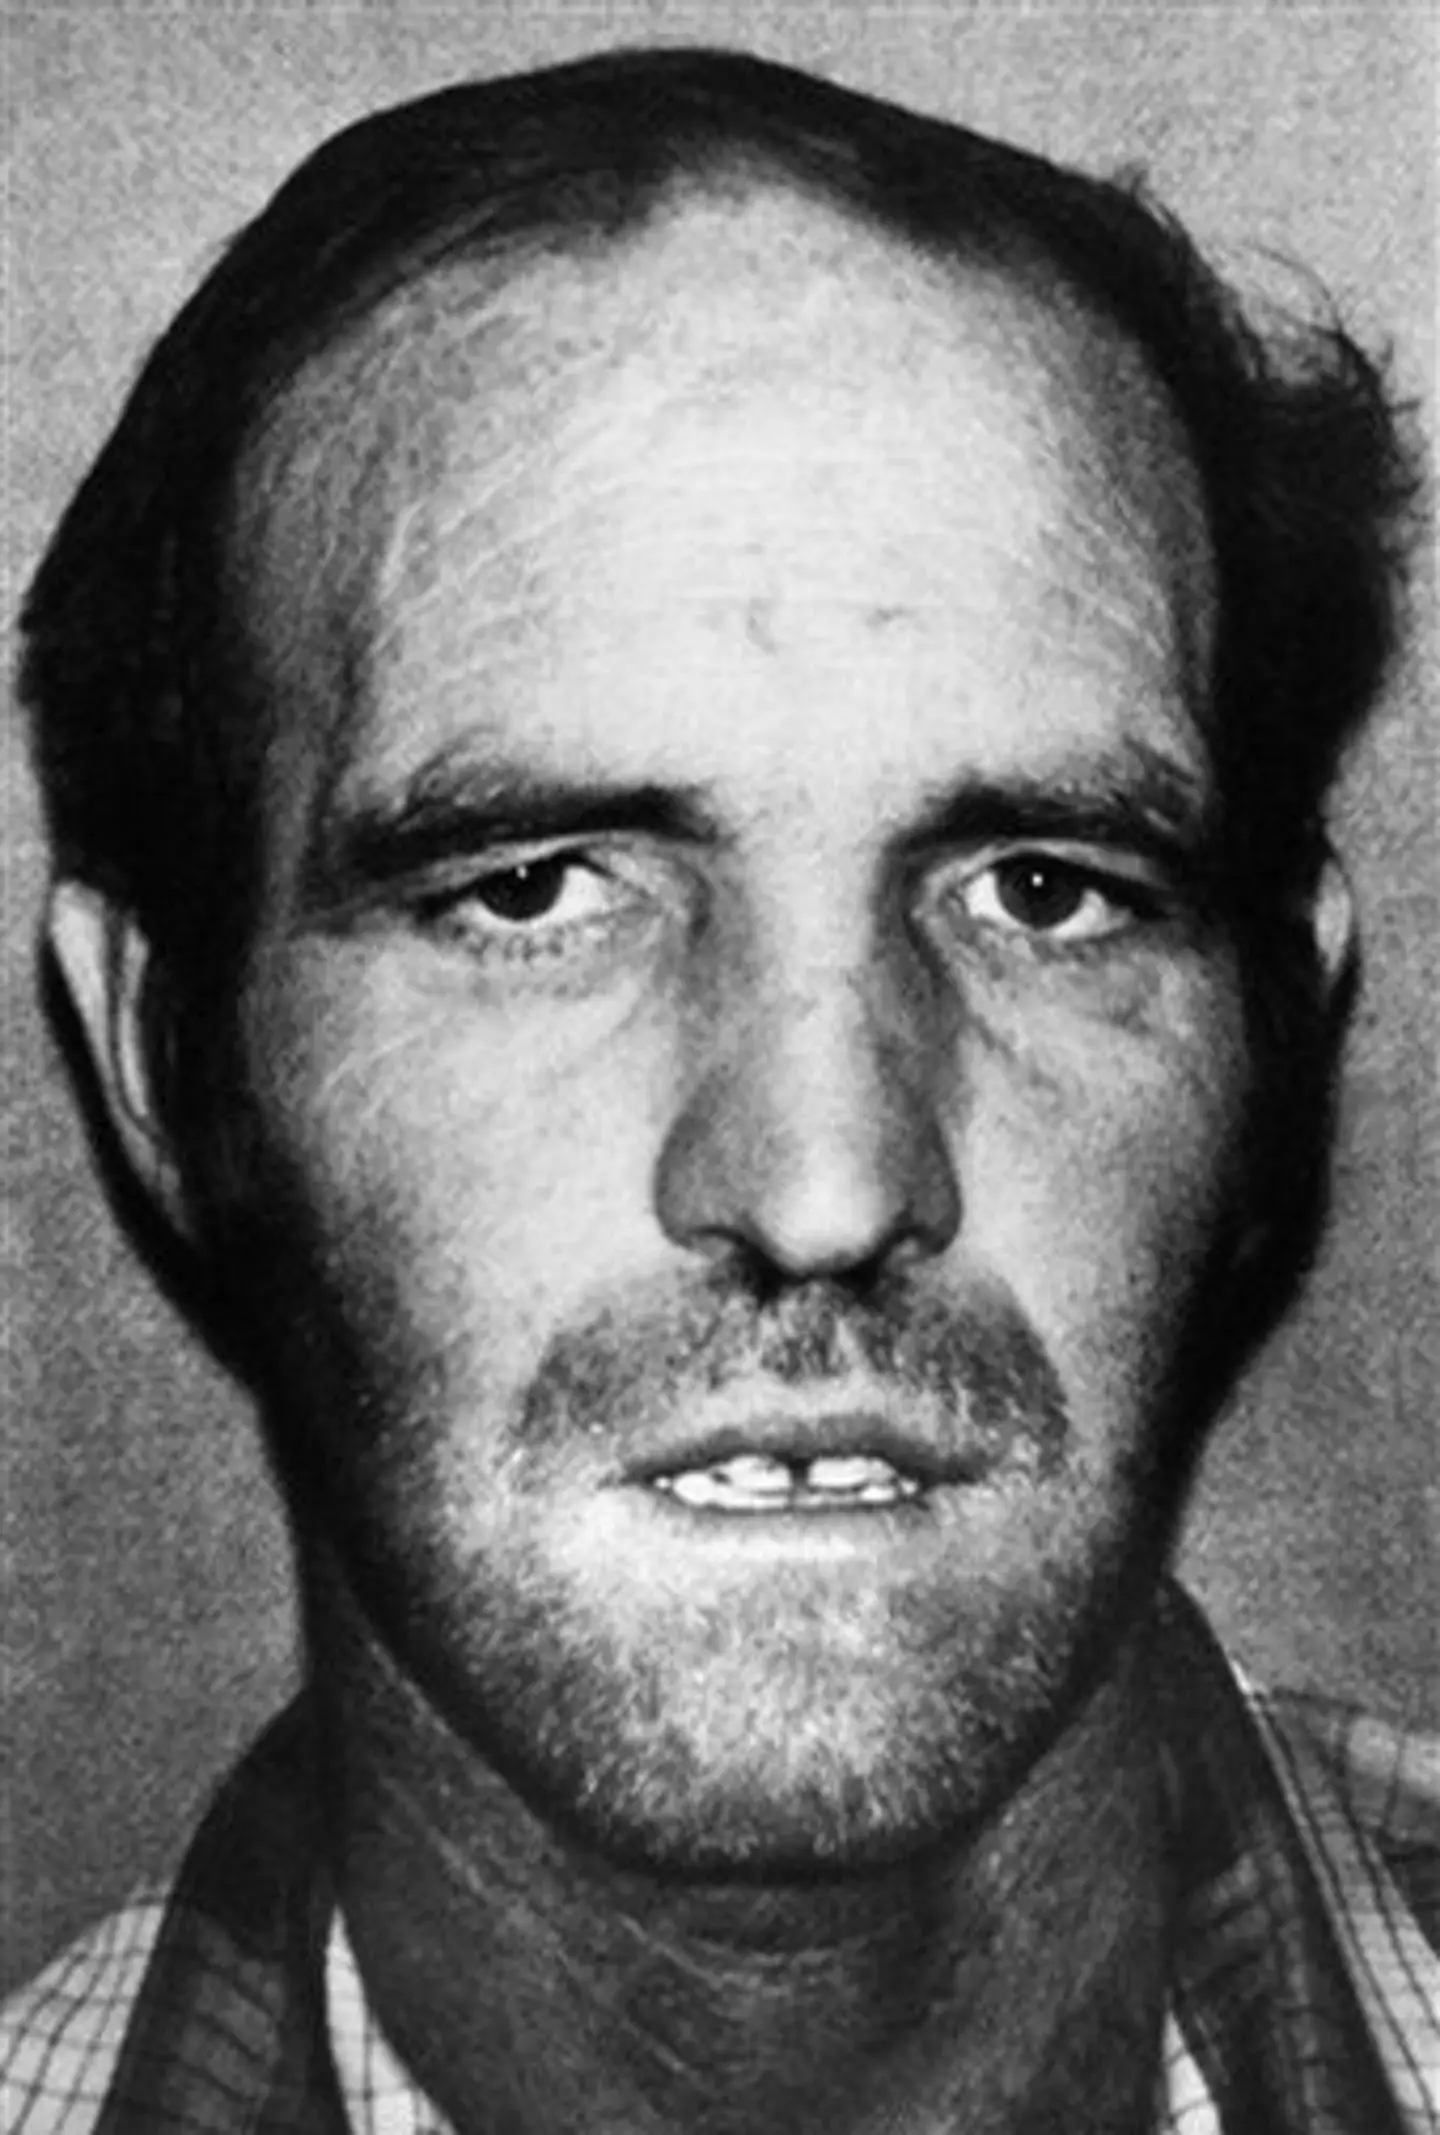 Ottis Toole was convicted of six murders - but confessed to many more.